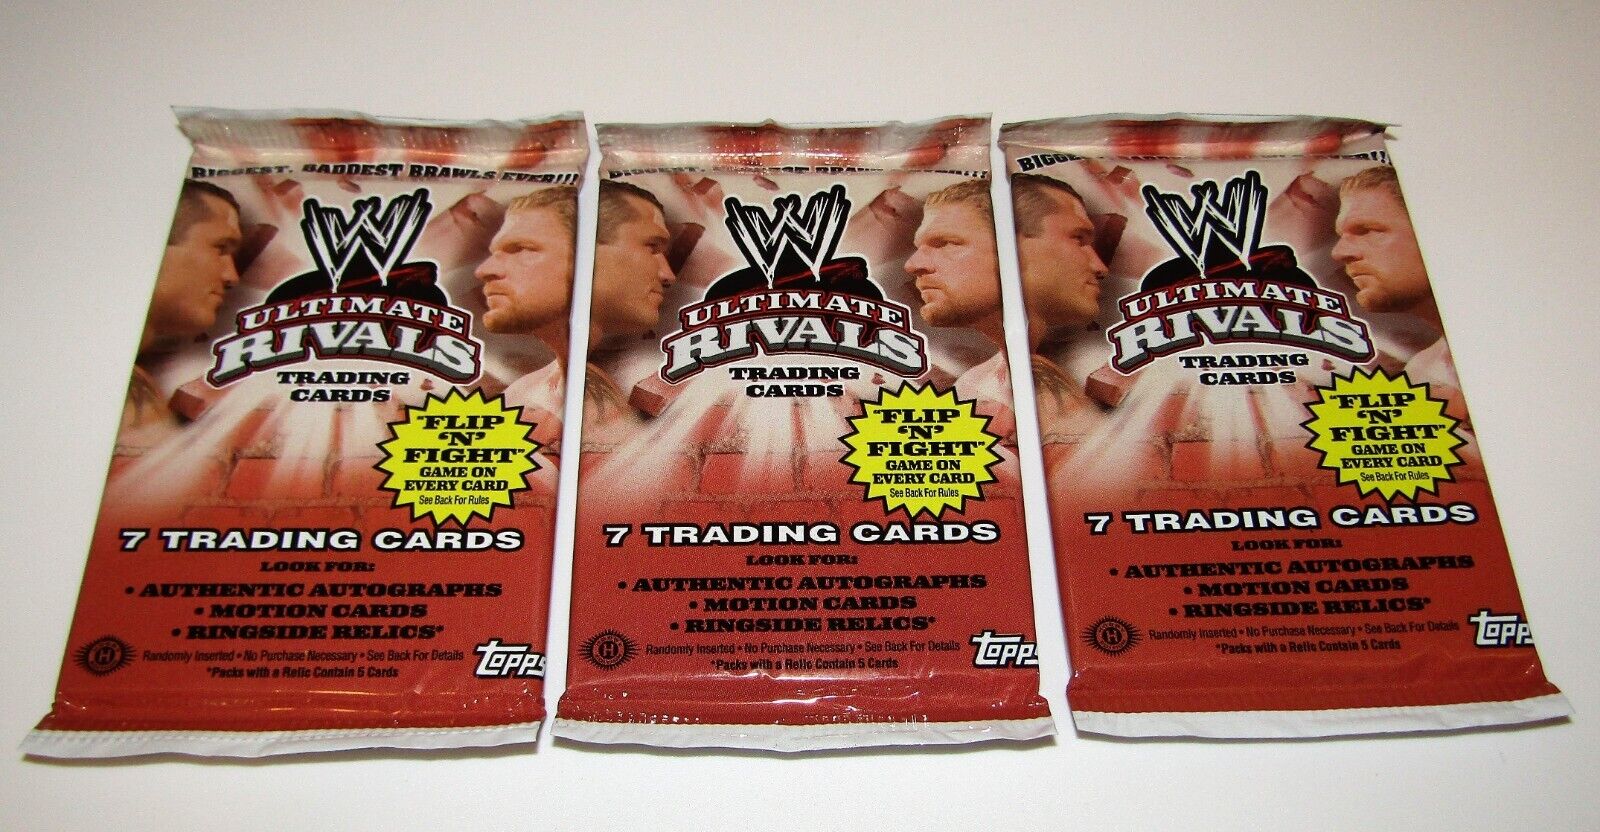 2008 TOPPS WWE ULTIMATE RIVALS WRESTING TRADING CARDS BUNDLE OF (3) PACKS